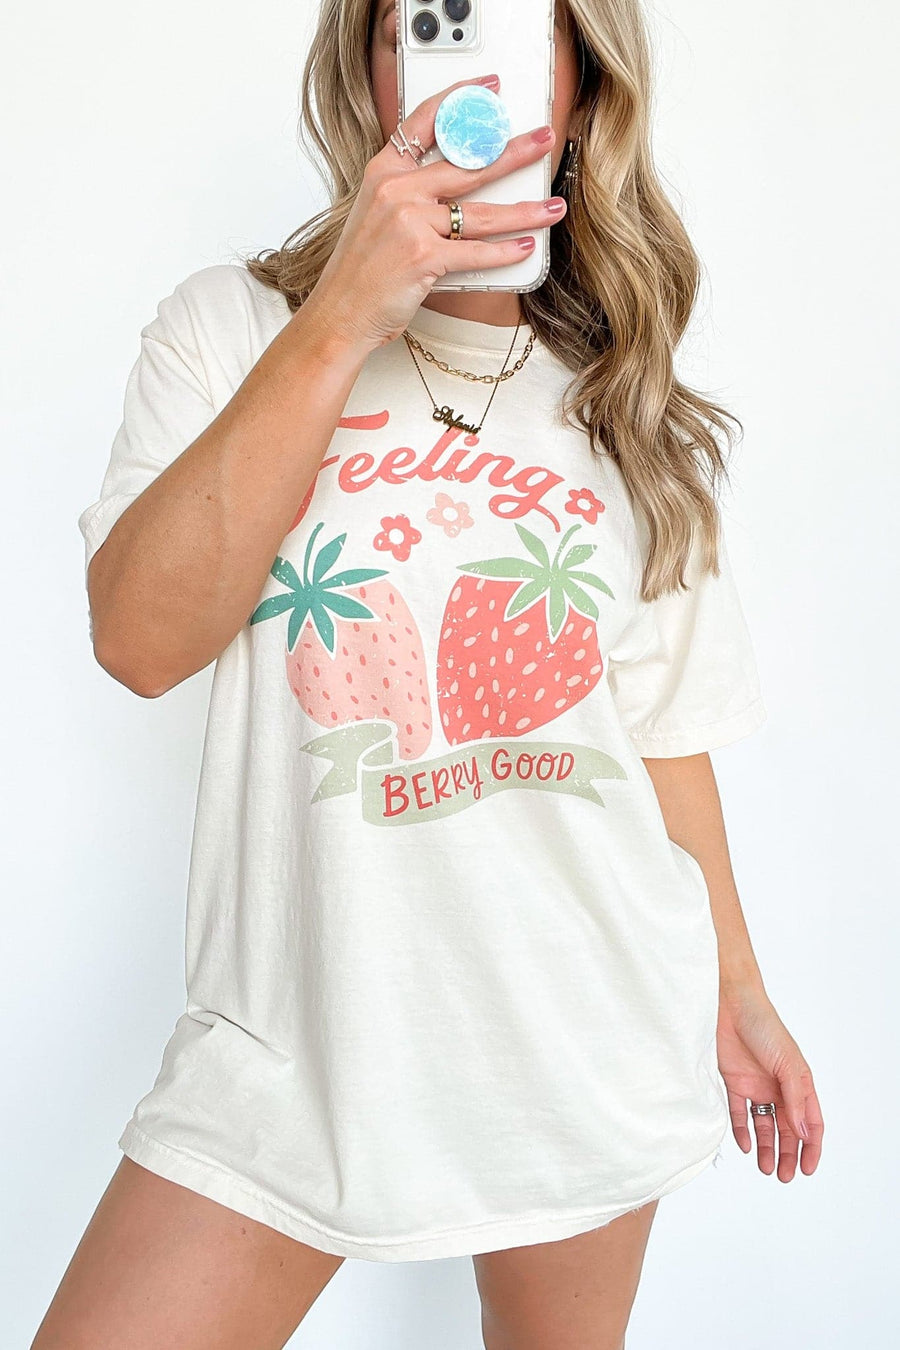  Feeling Berry Good Vintage Relaxed Graphic Tee - FINAL SALE - Madison and Mallory